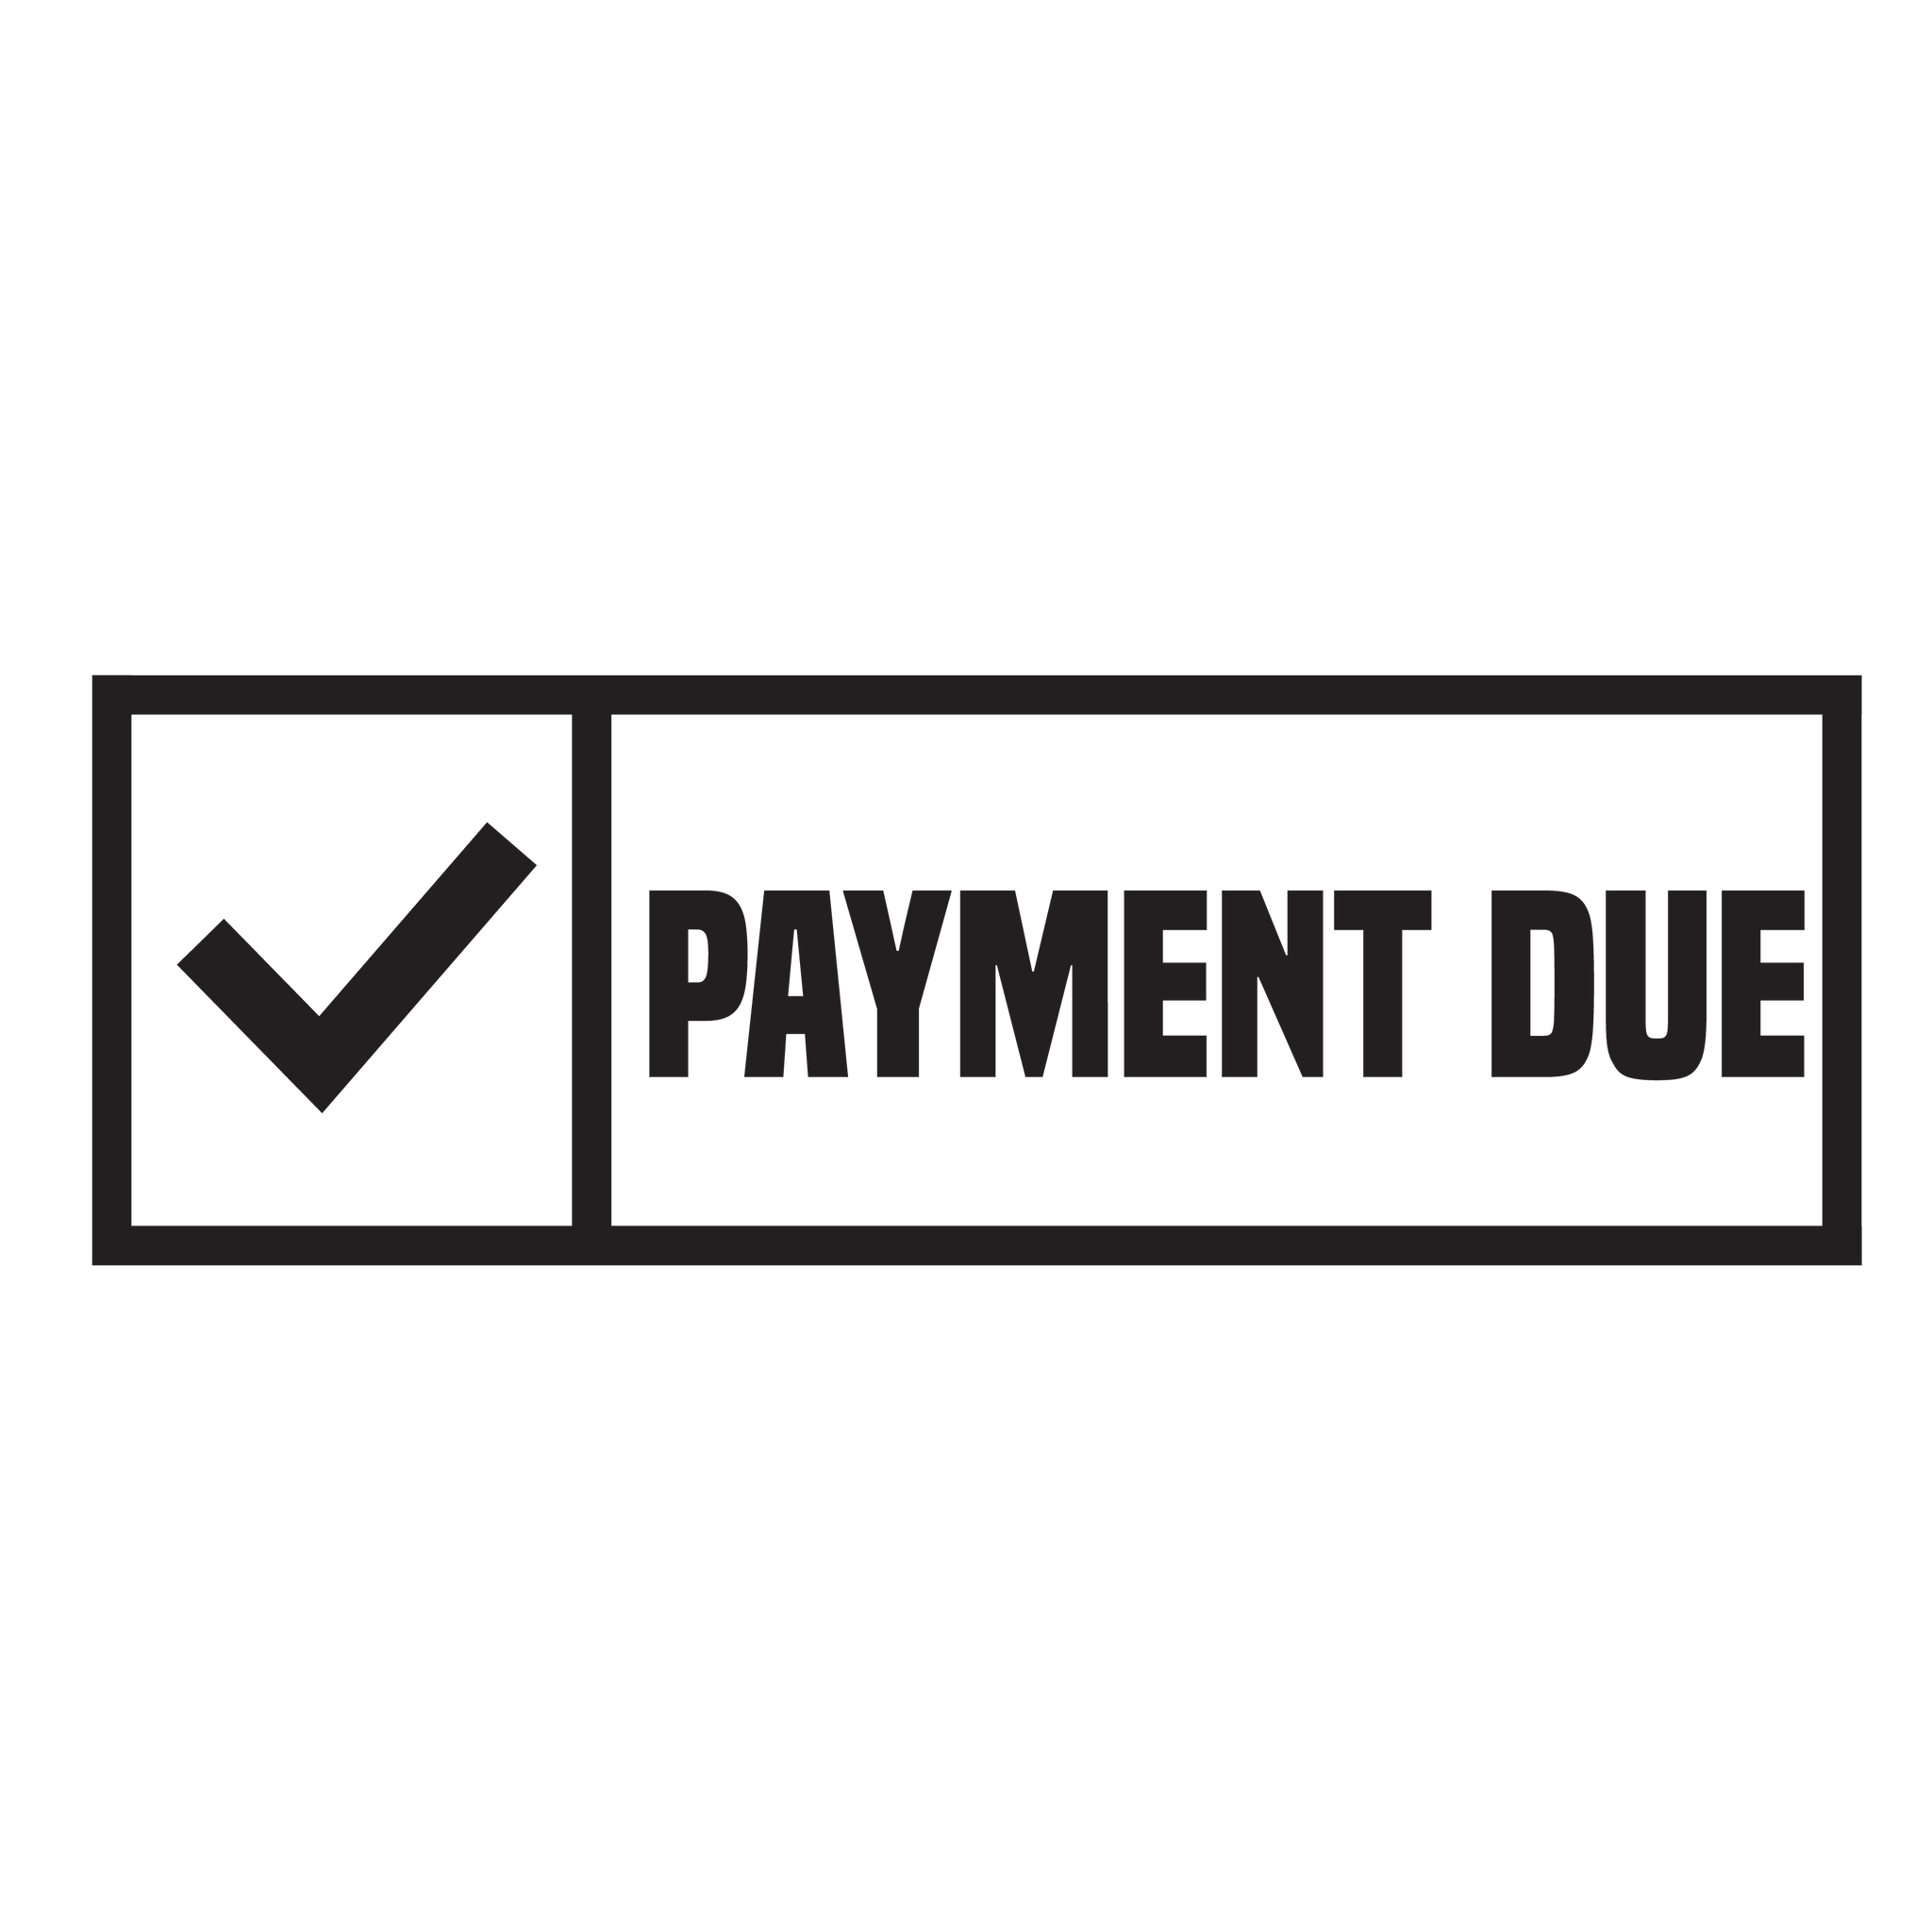 Check Box PAYMENT DUE Stamp